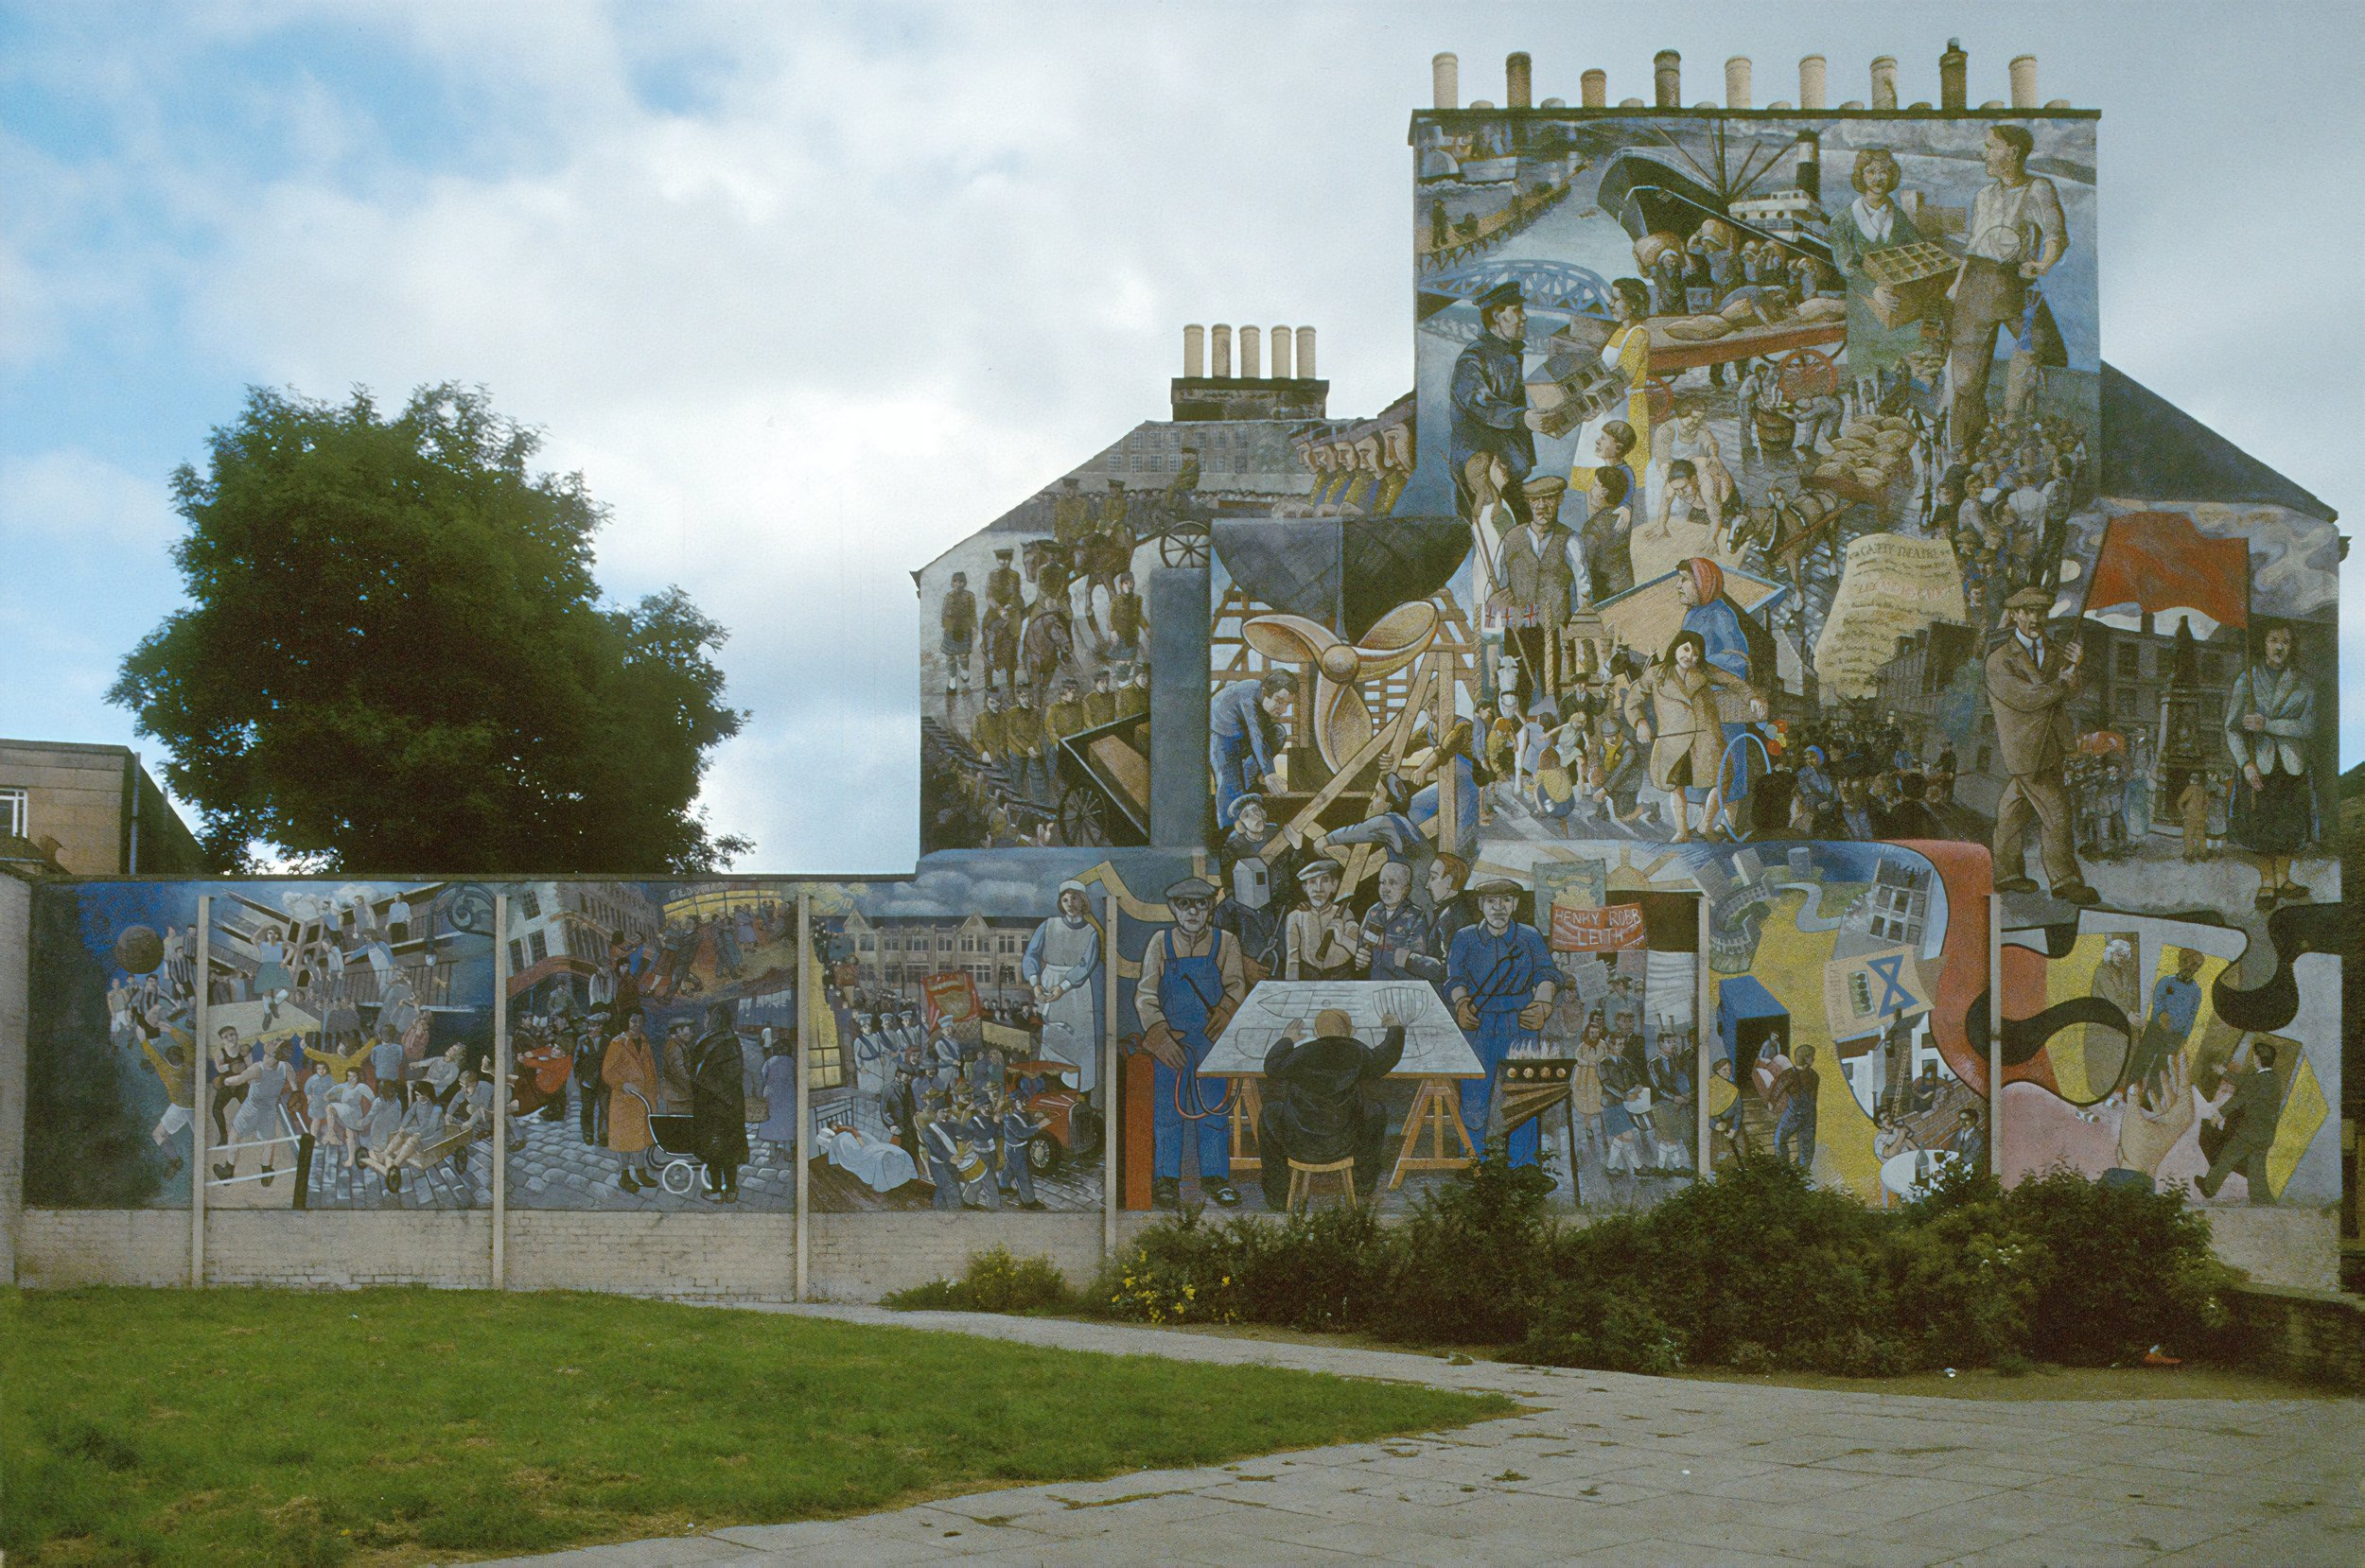 An early photograph of the mural